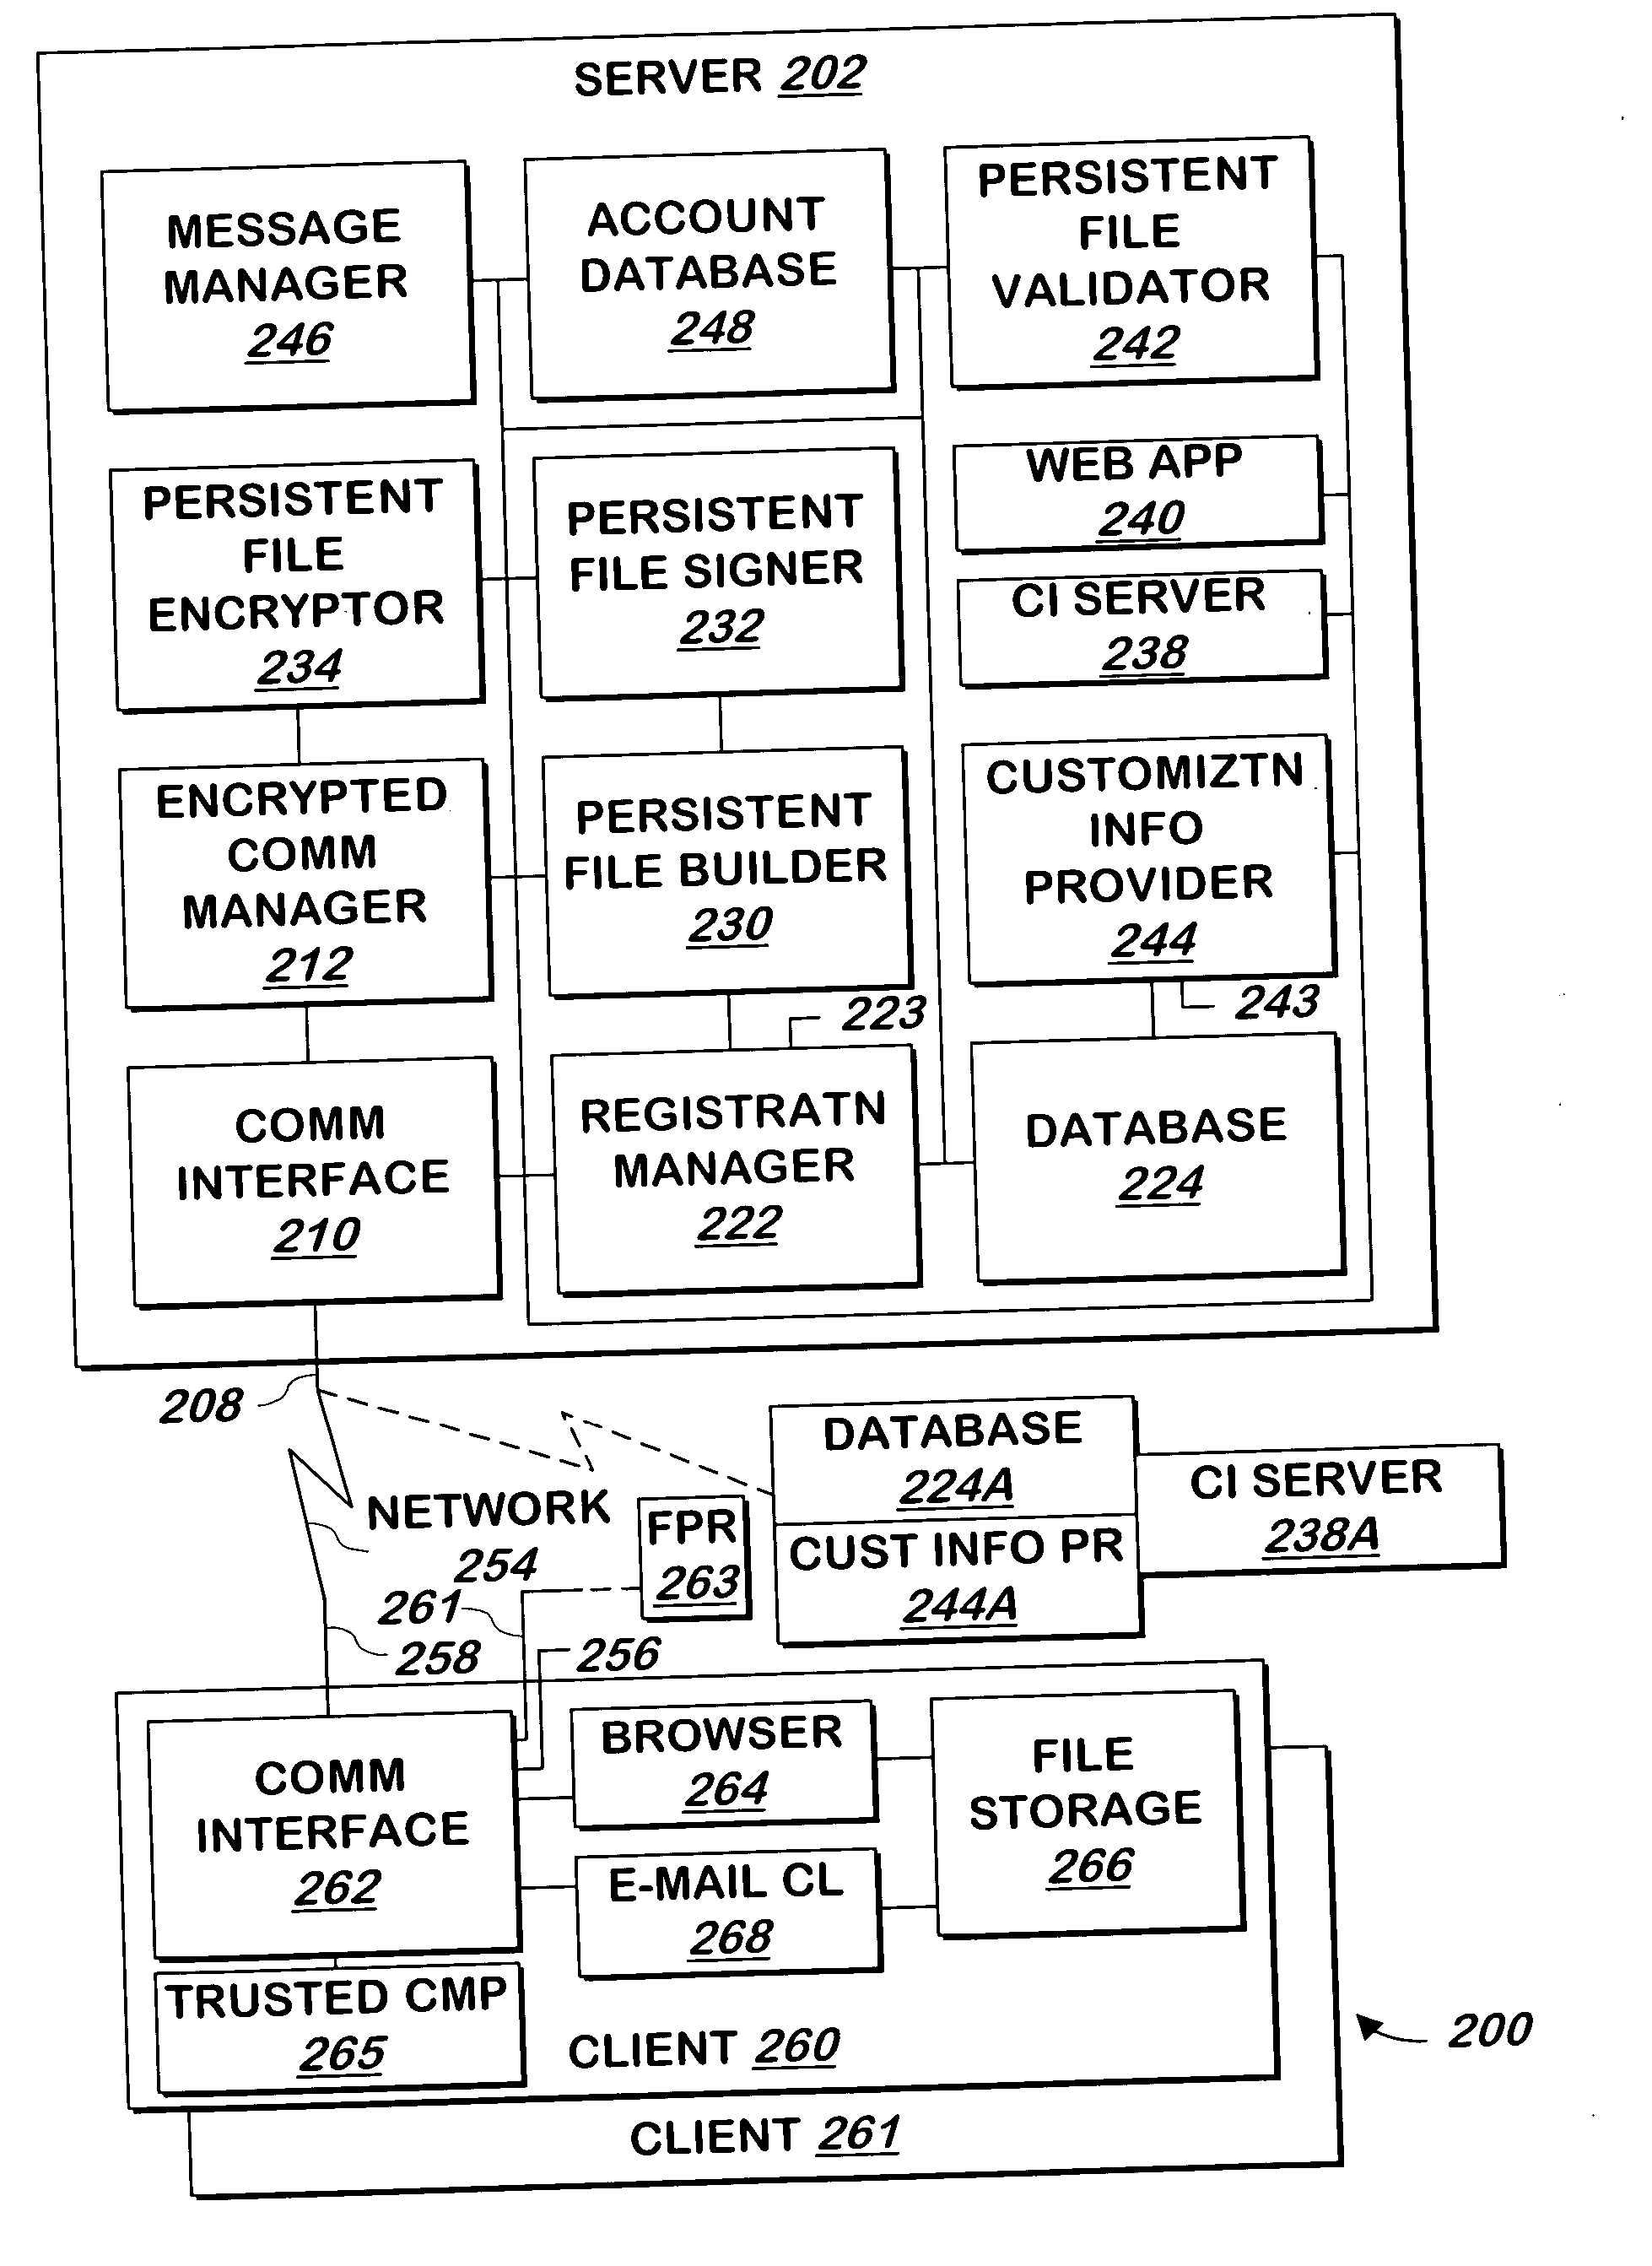 System and method for authentication of users and communications received from computer systems